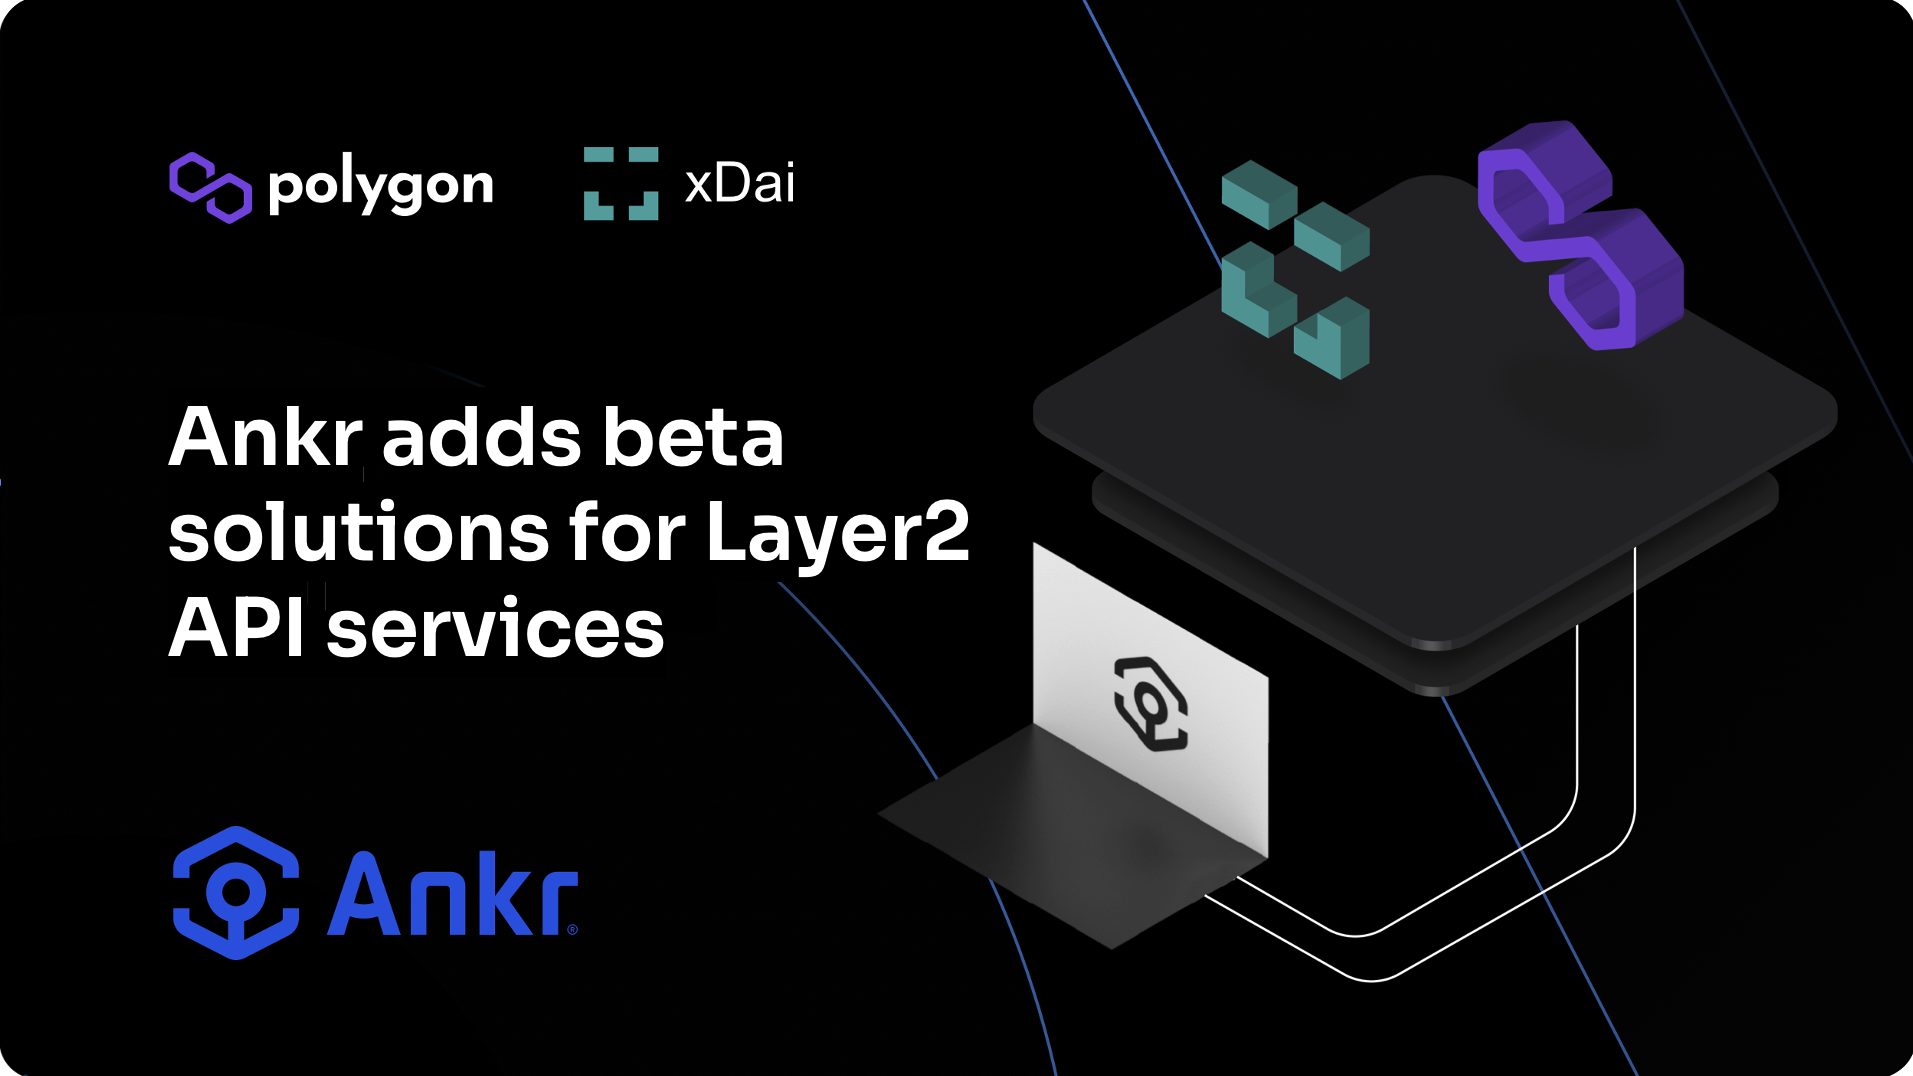 Ankr adds beta solutions for Layer2 API services